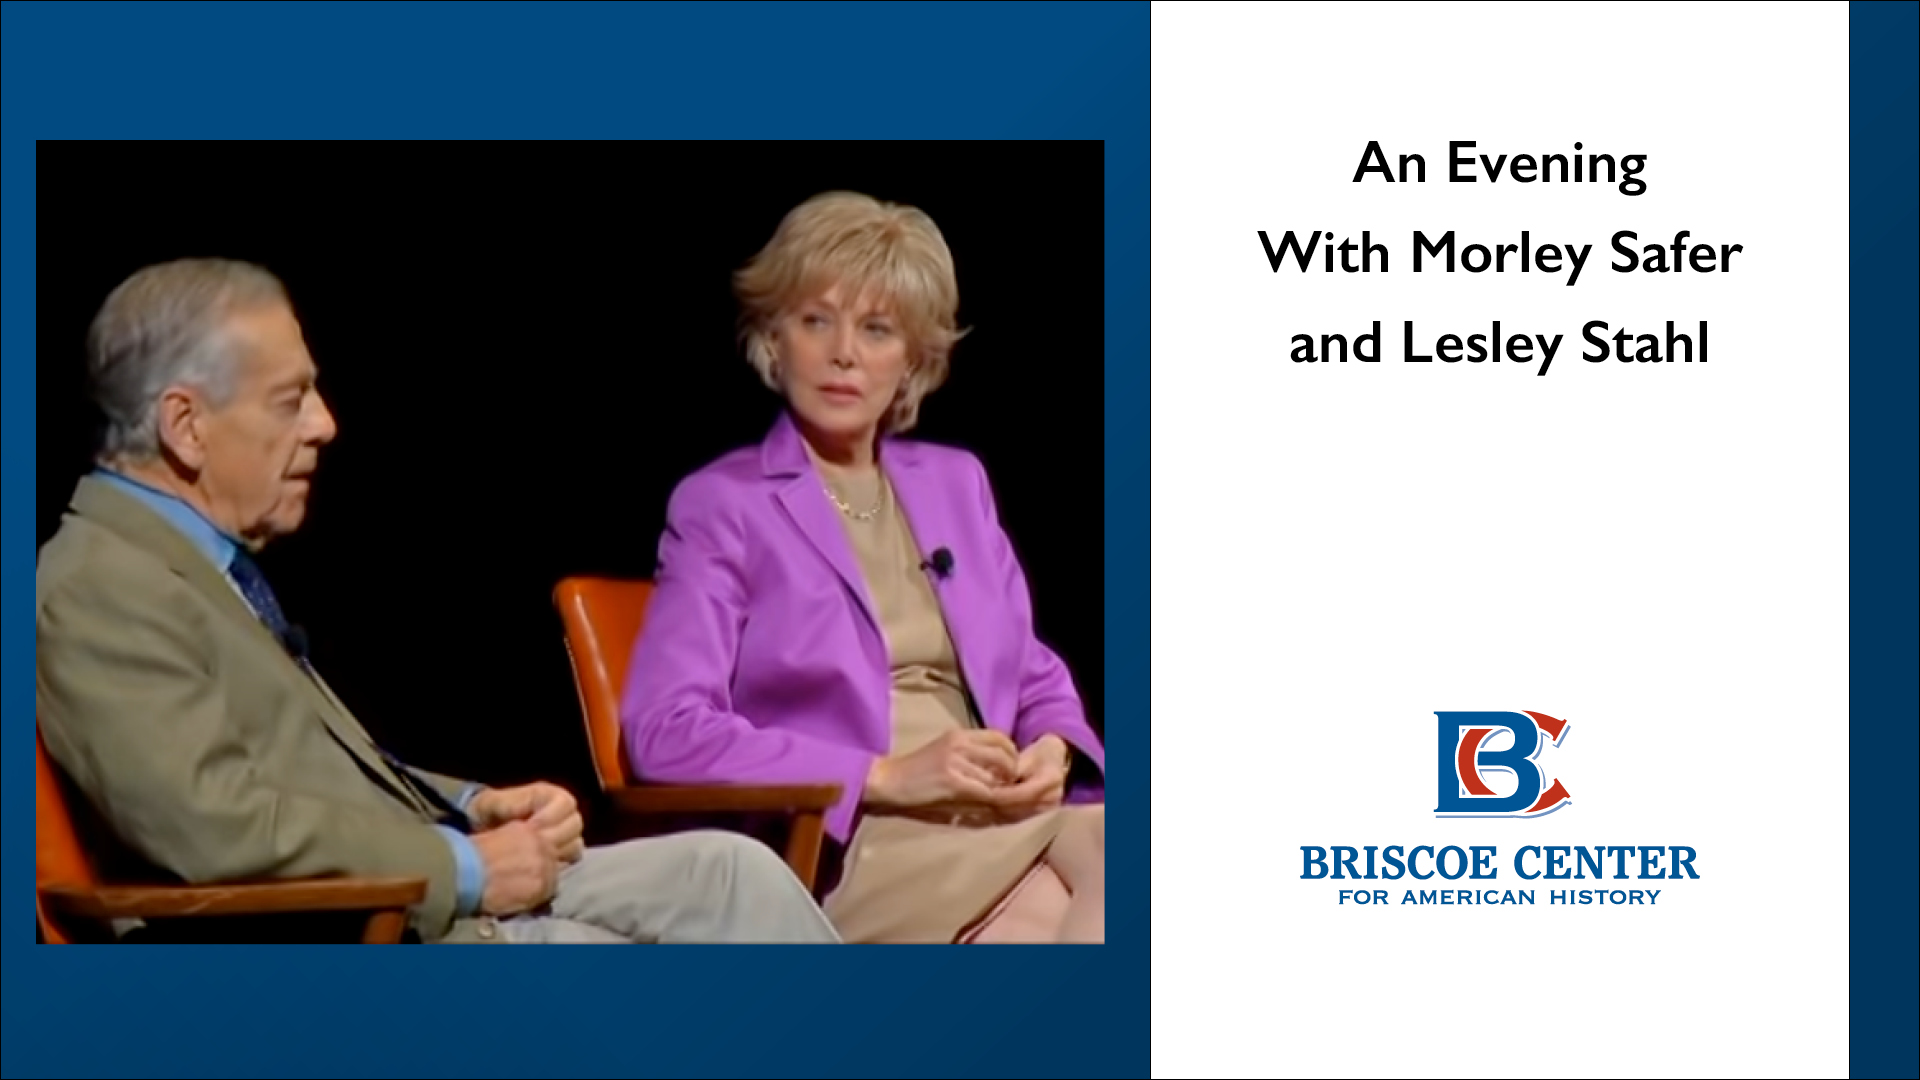 An Evening With Morley Safer and Lesley Stahl